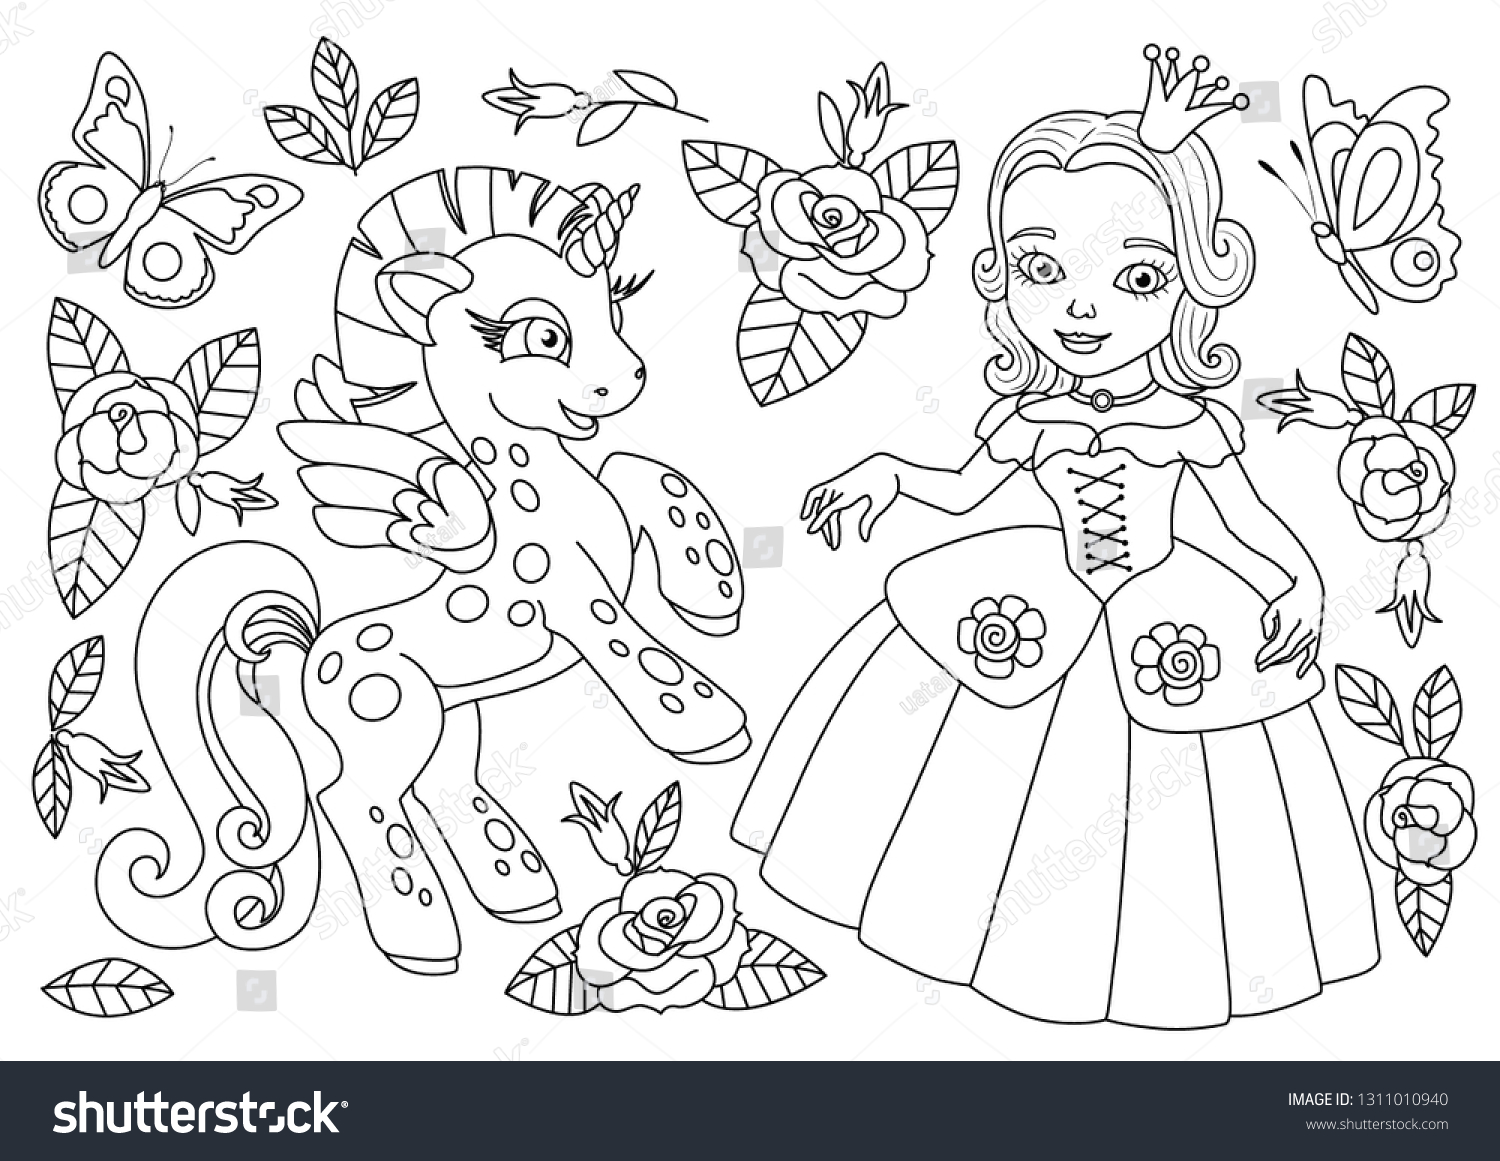 Princess unicorn coloring page coloring page stock vector royalty free